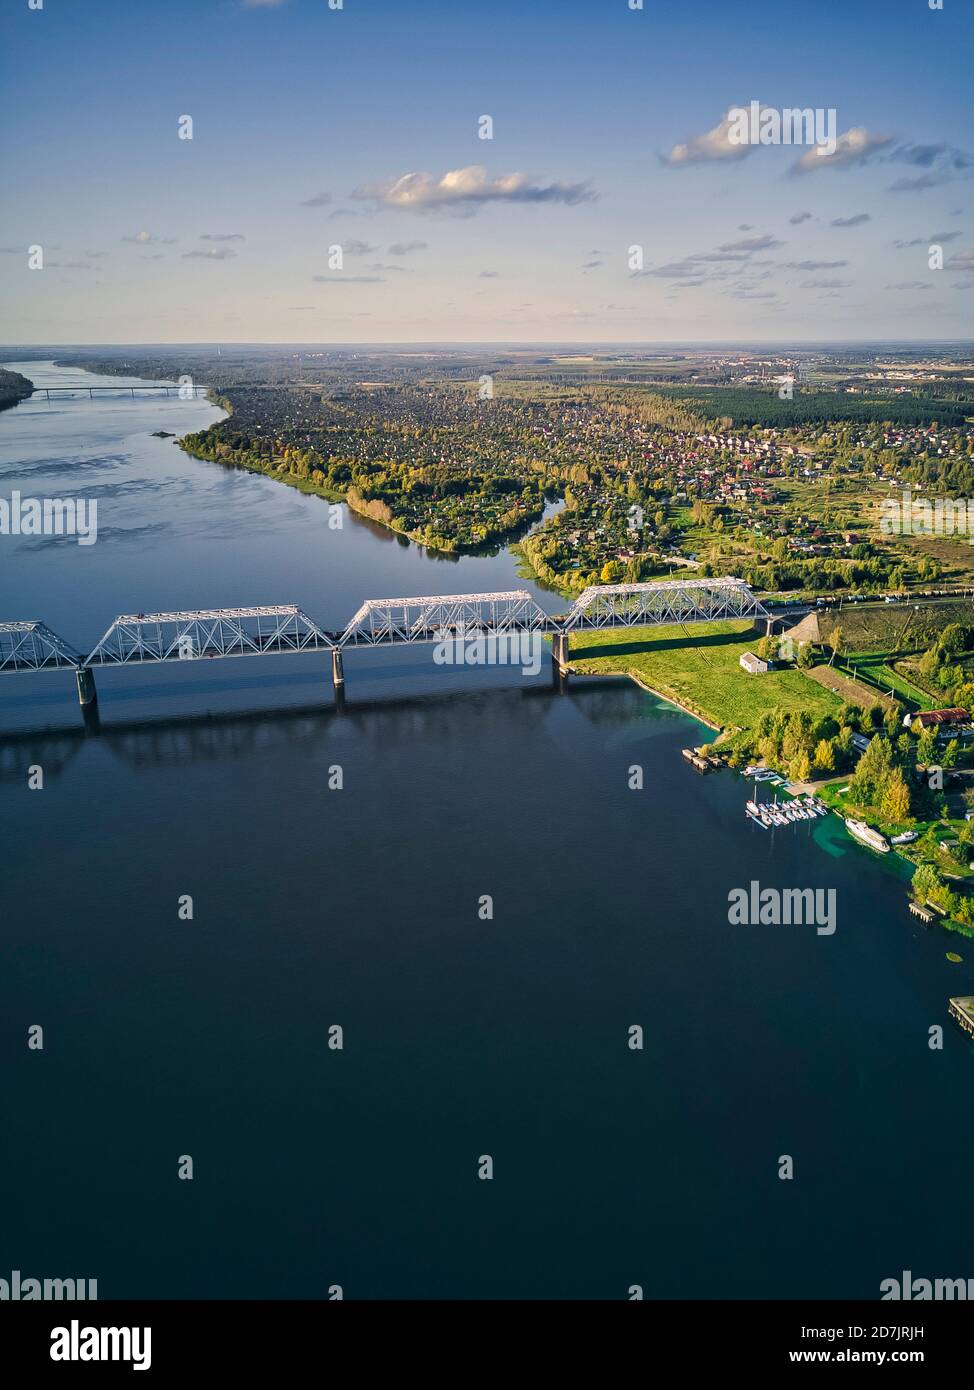 Railway bridge over Volga River in city against sky at sunset seen from above Stock Photo